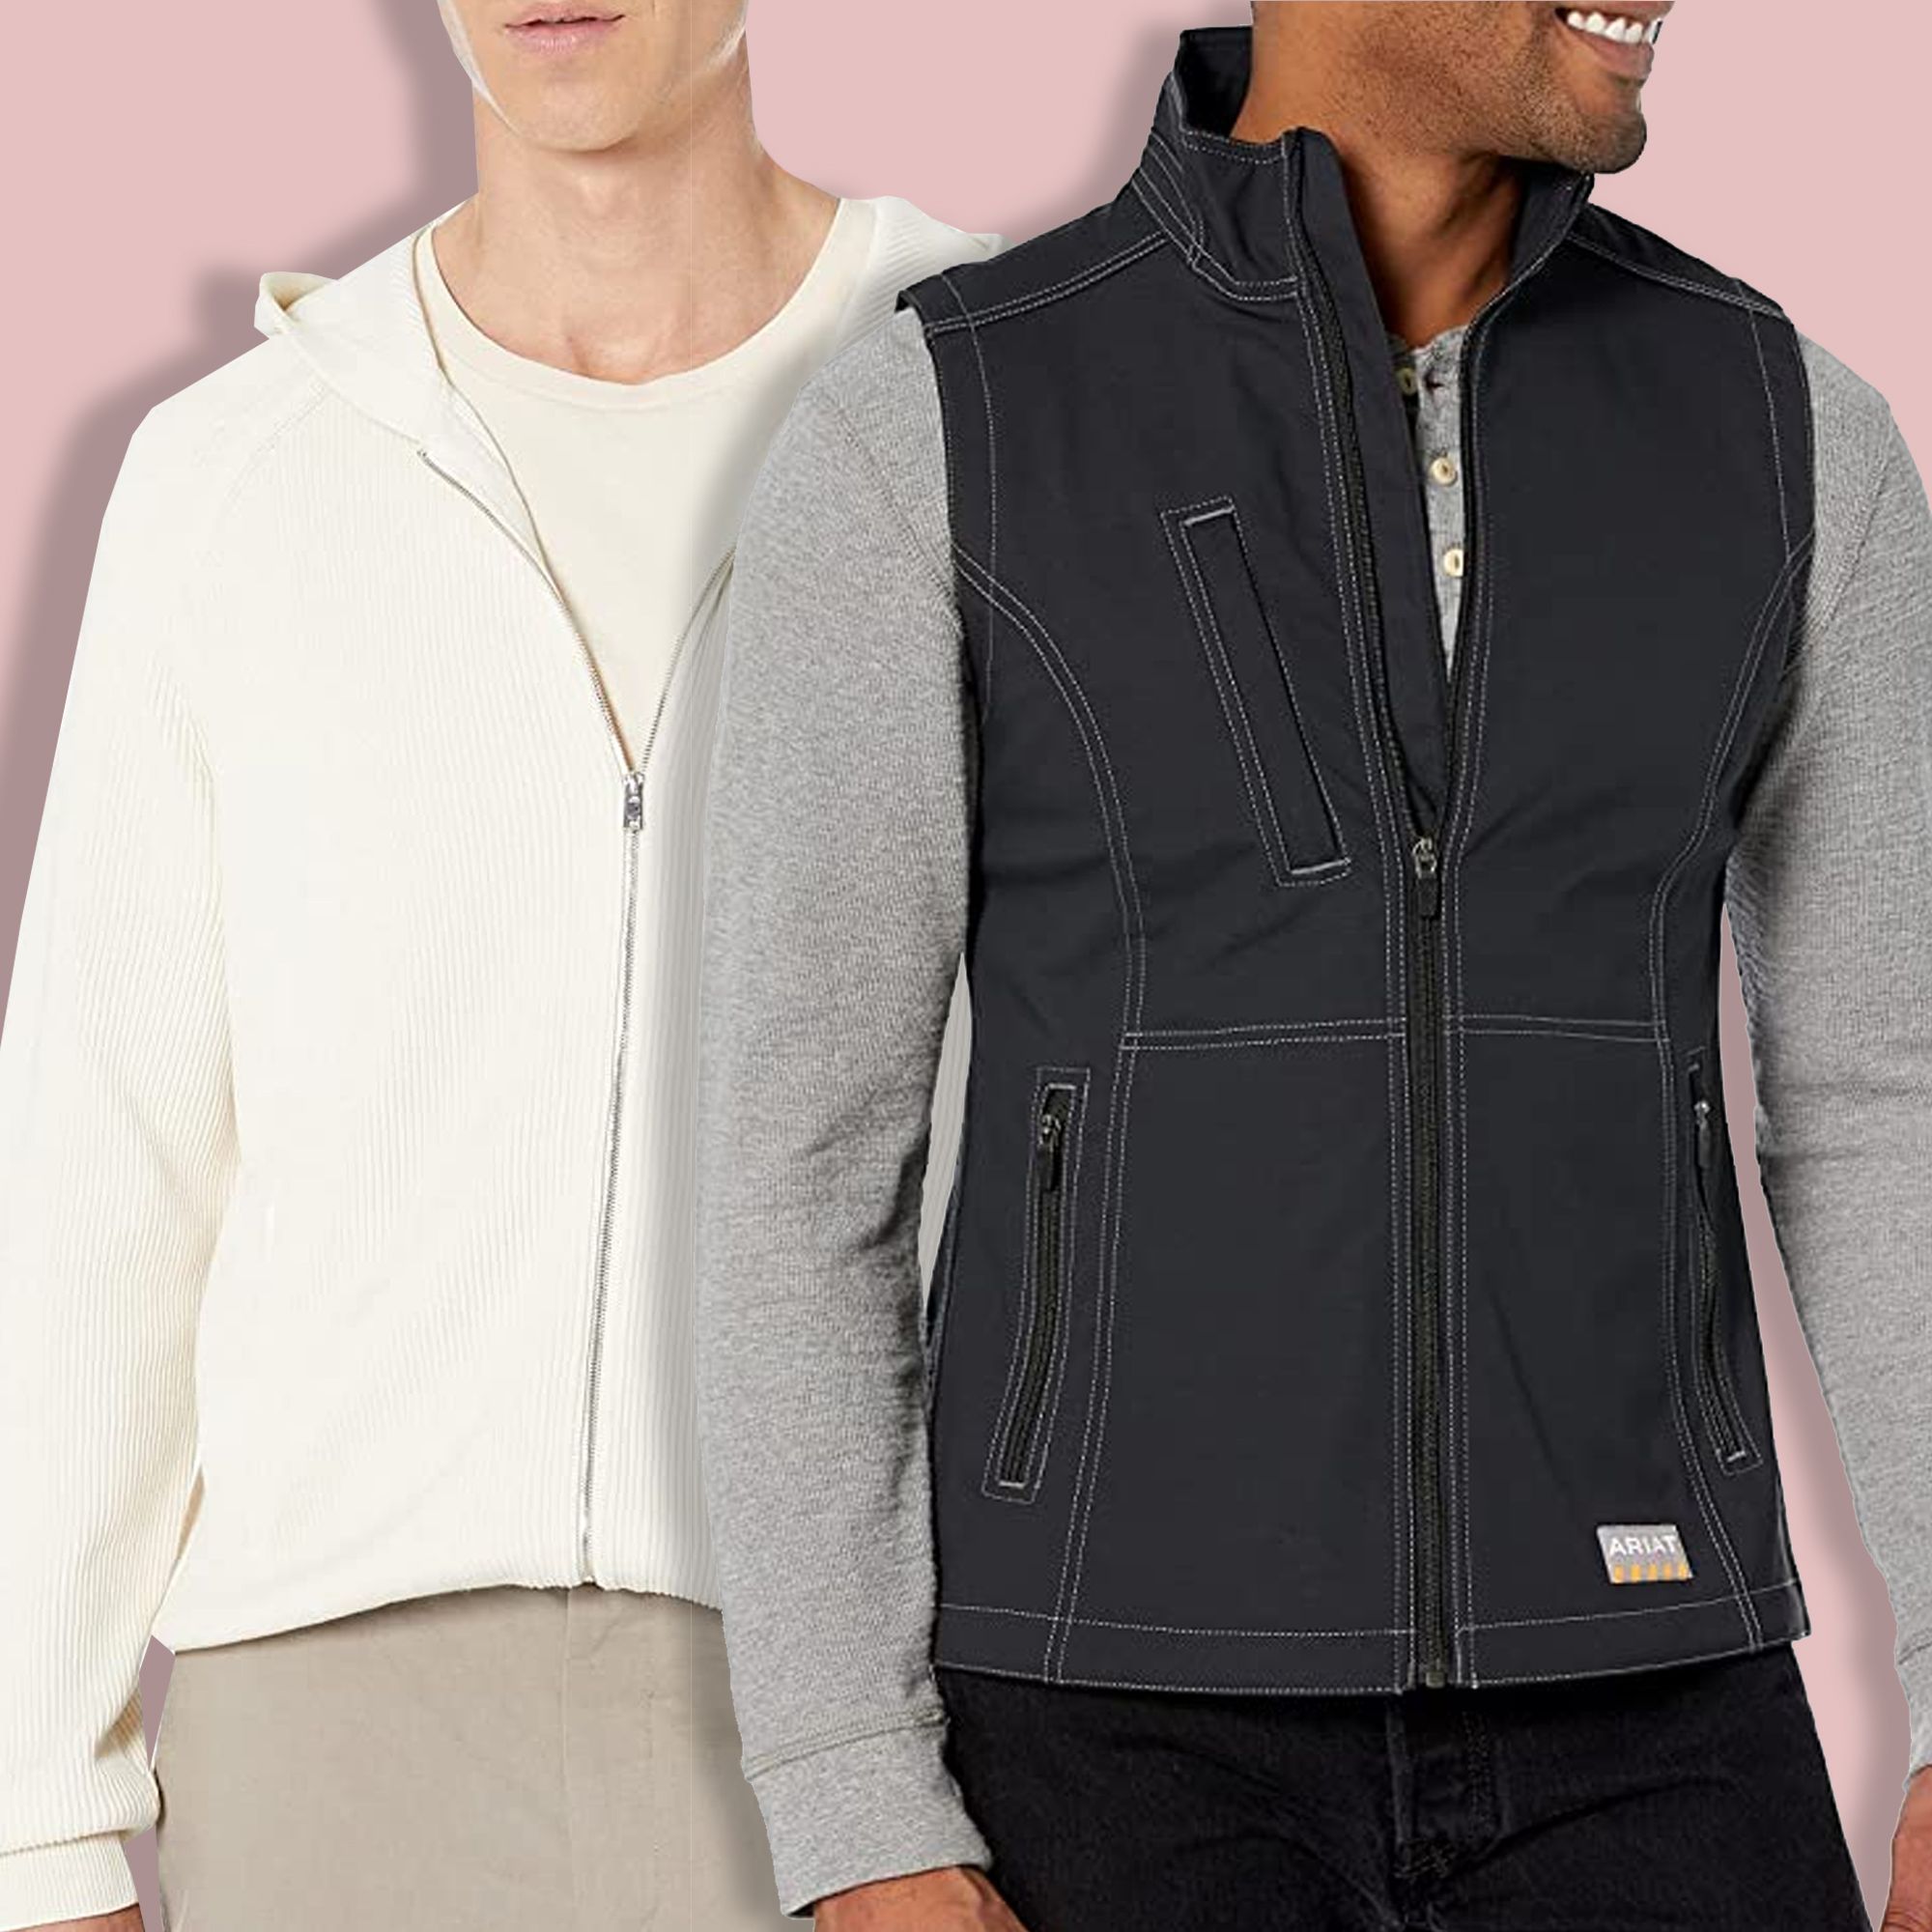 The Best Discounted Designer Menswear From Amazon's Premium Outlet